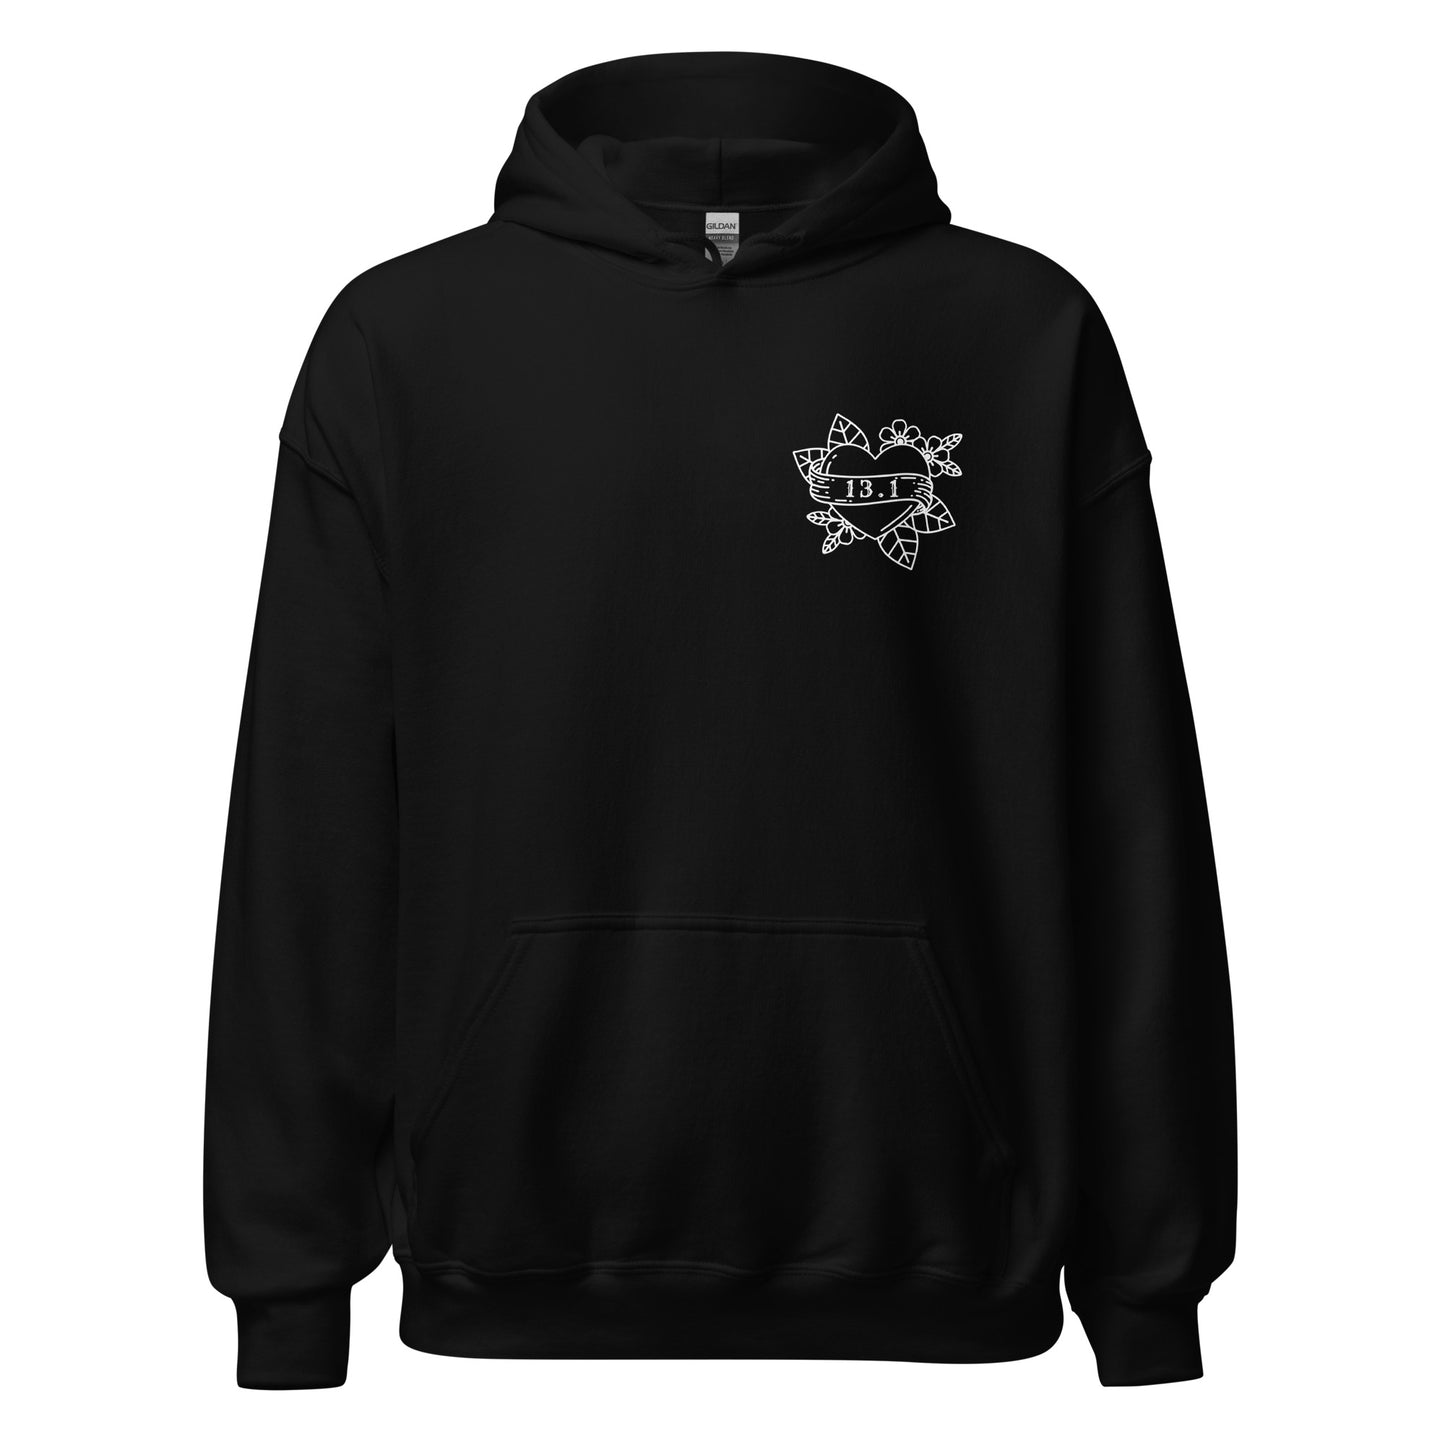 black hoodie with 13.1 half  marathon distance in a tattoo style heart across the left breast